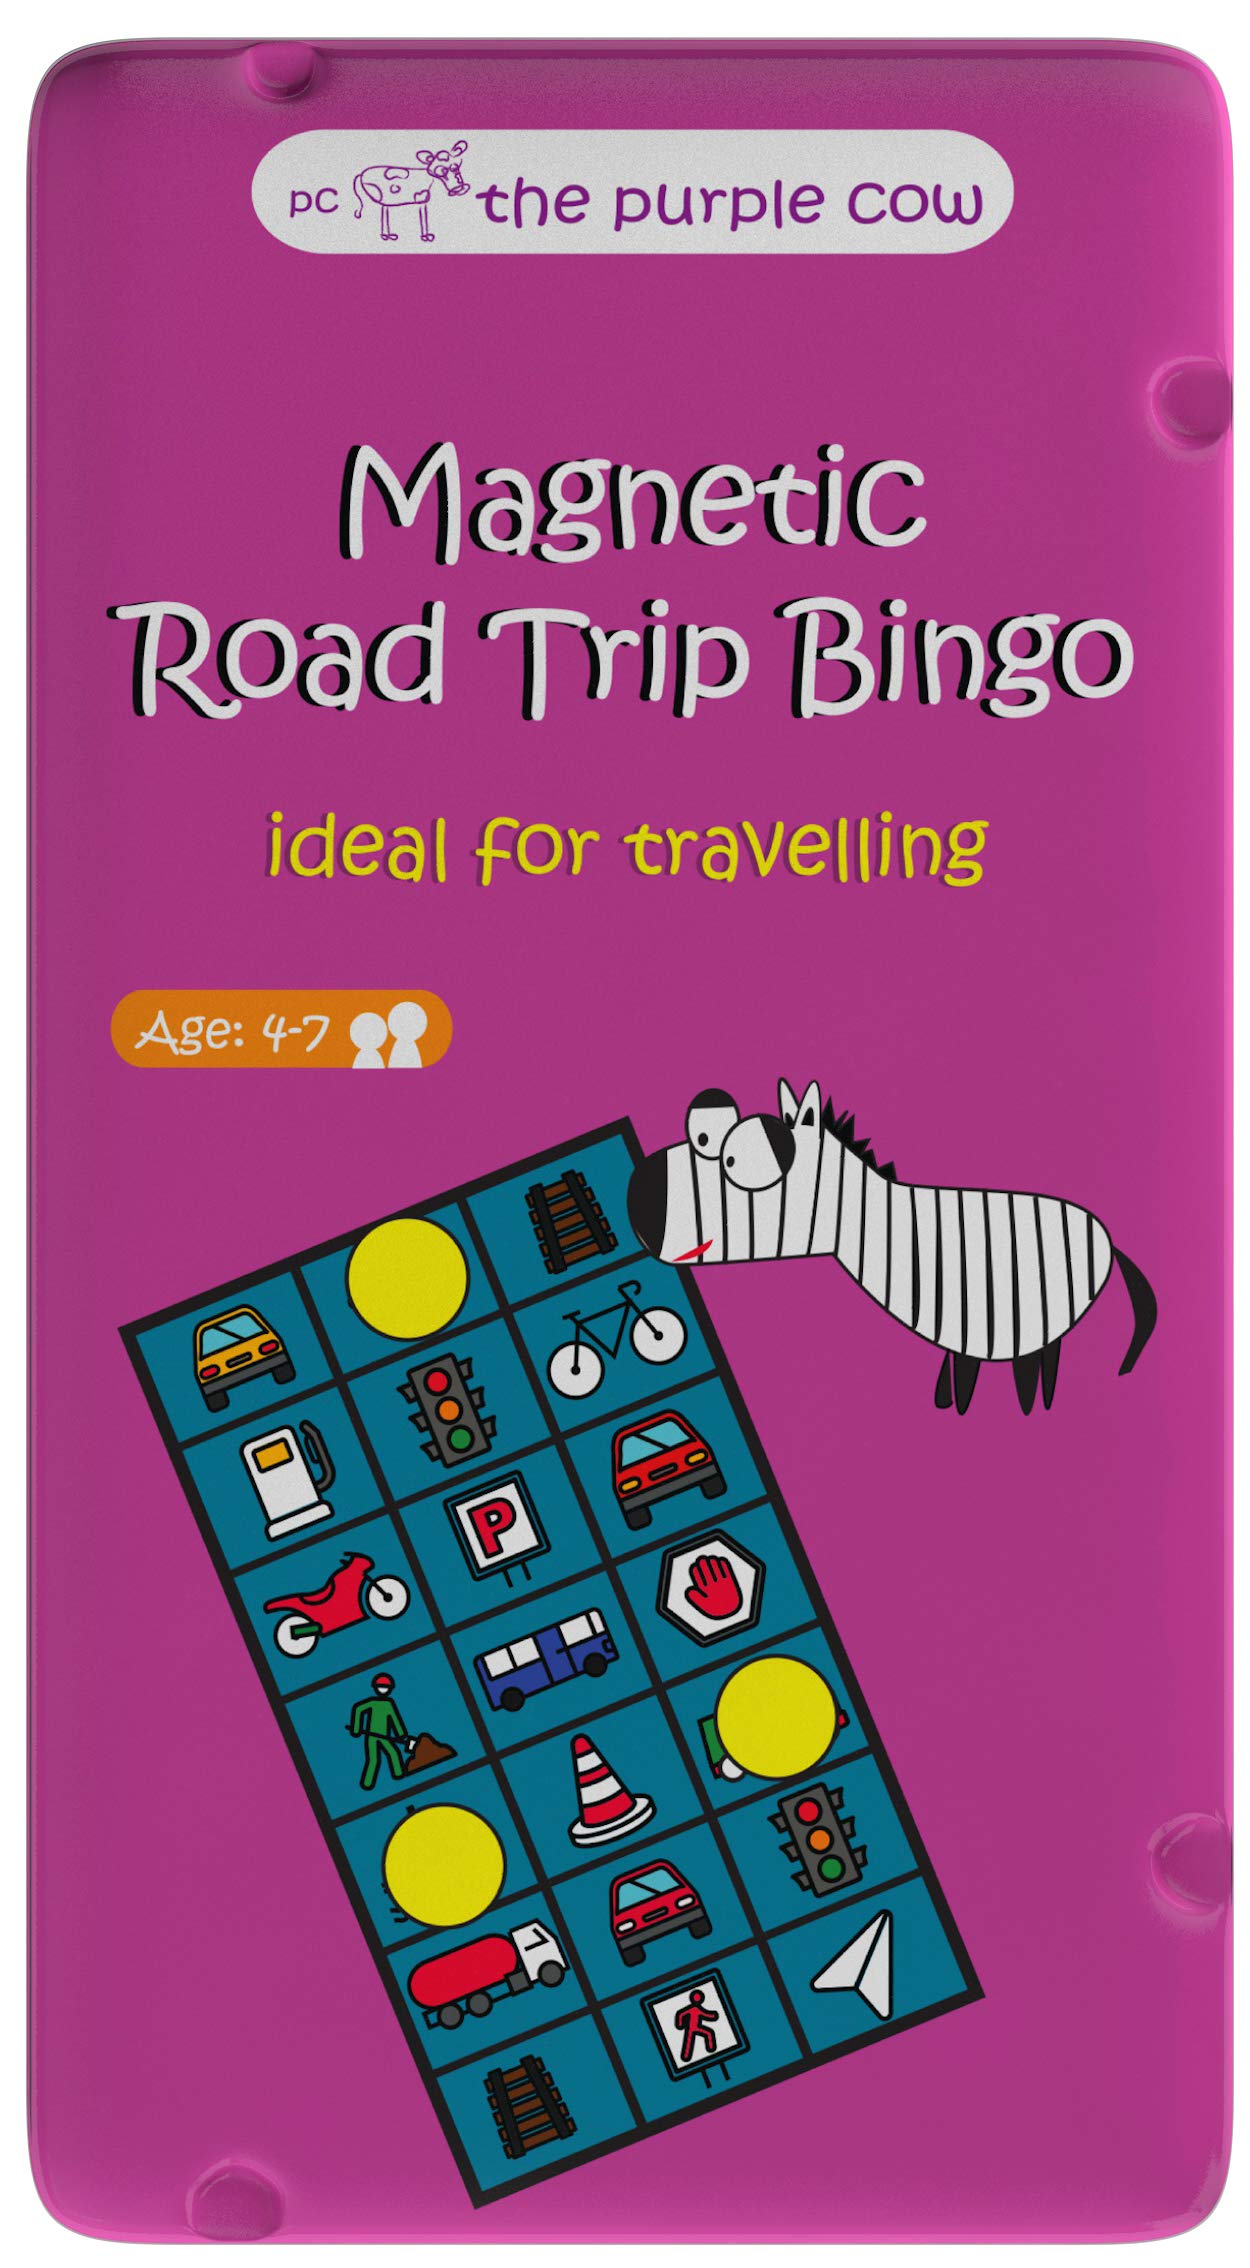 The Purple Cow Magnetic Travel Road Trip Bingo Game - Board Games for Kids and Adults. Great for Travel